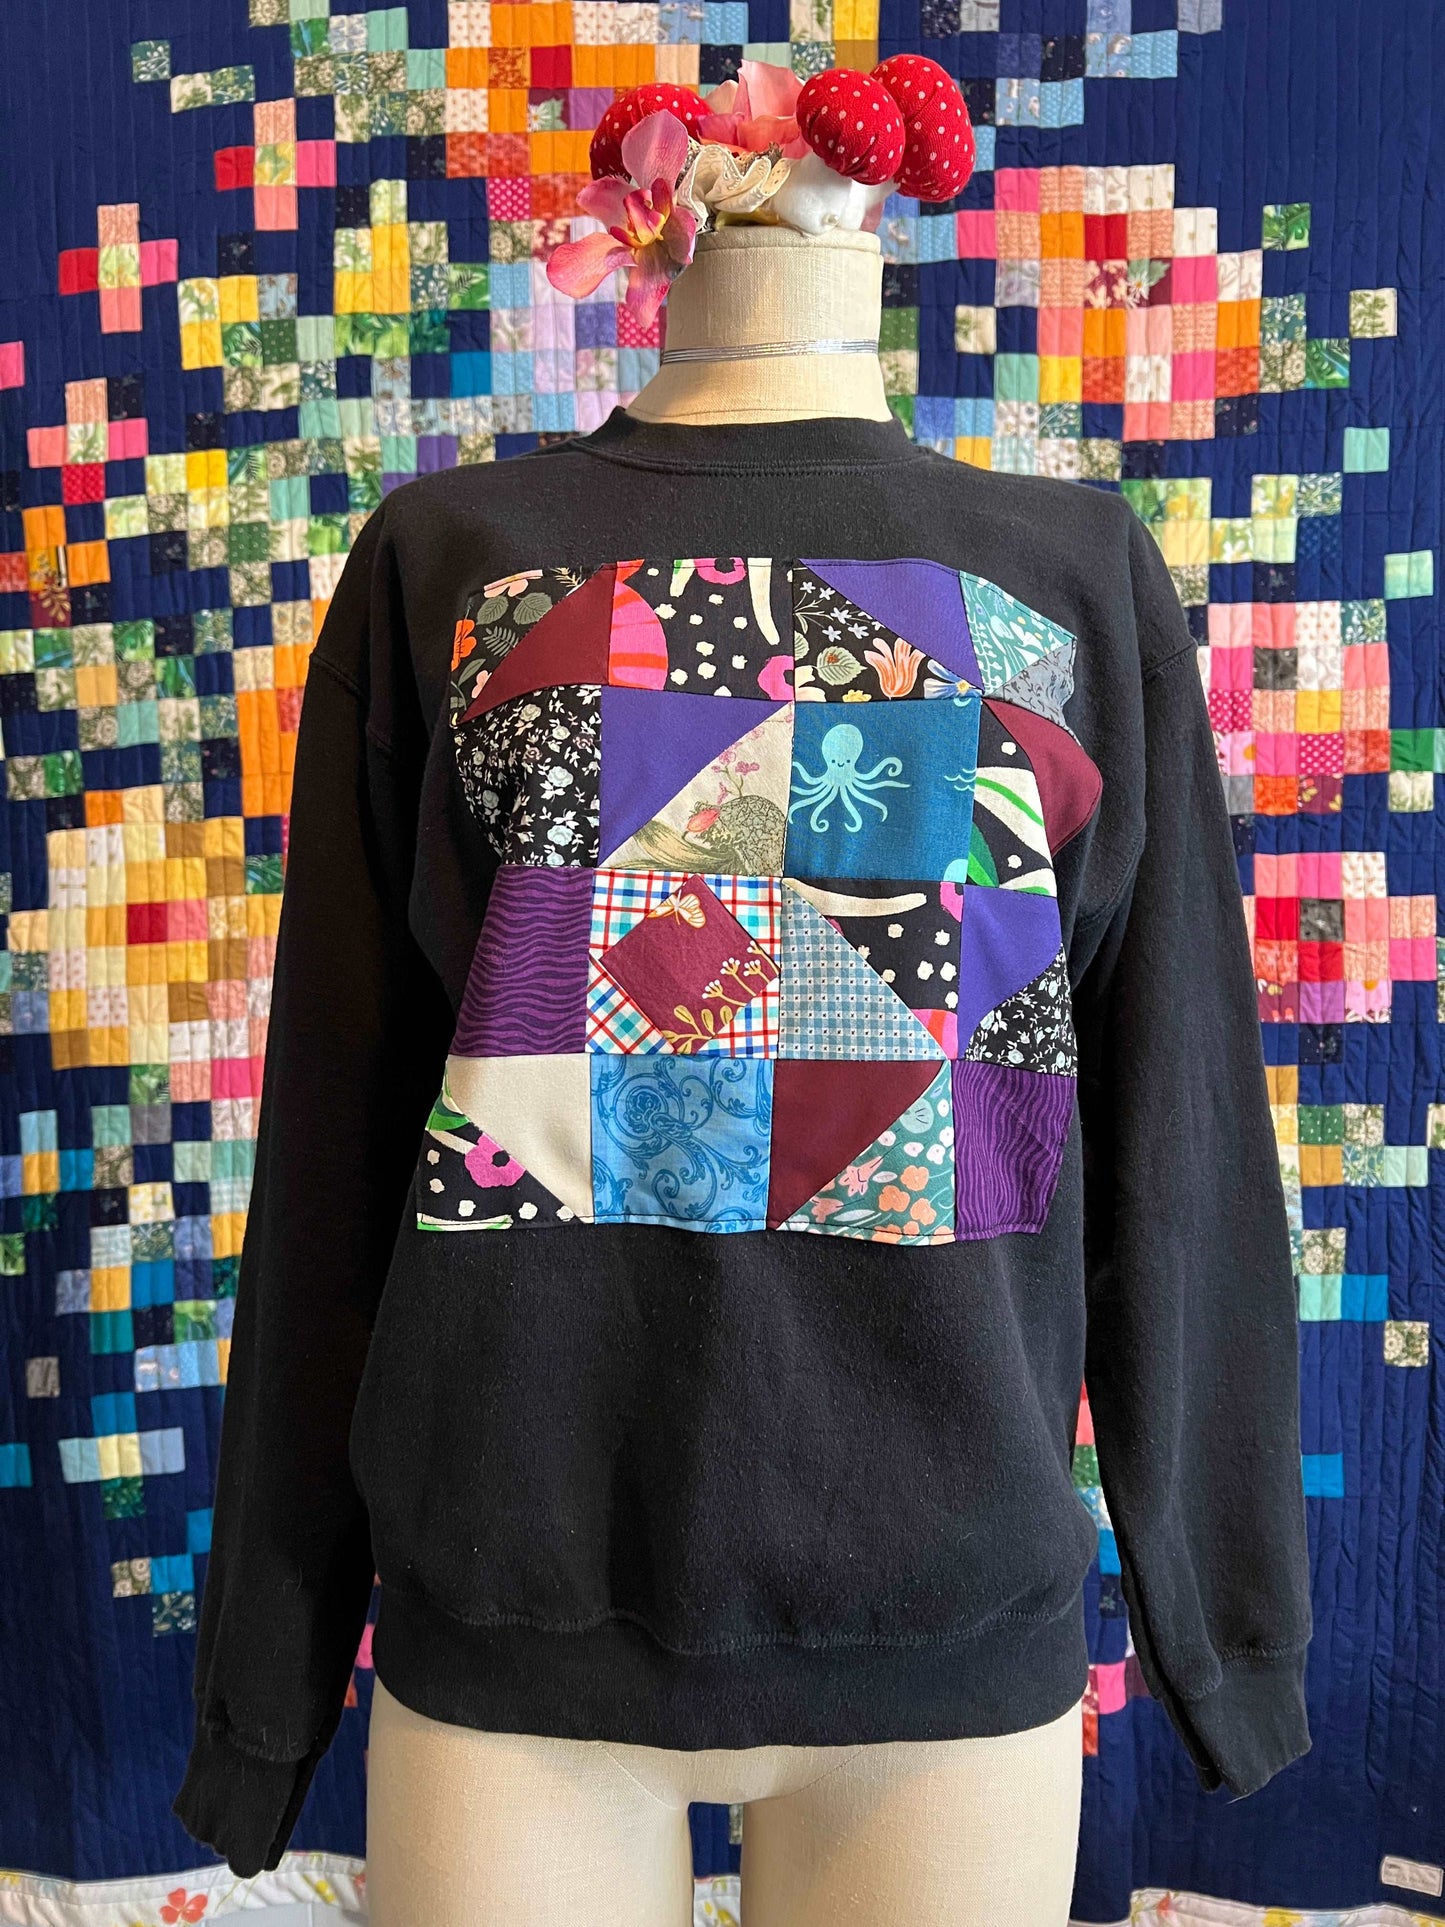 5 Panic Clothing - Quilt-Block Crew - Choose Your Style!